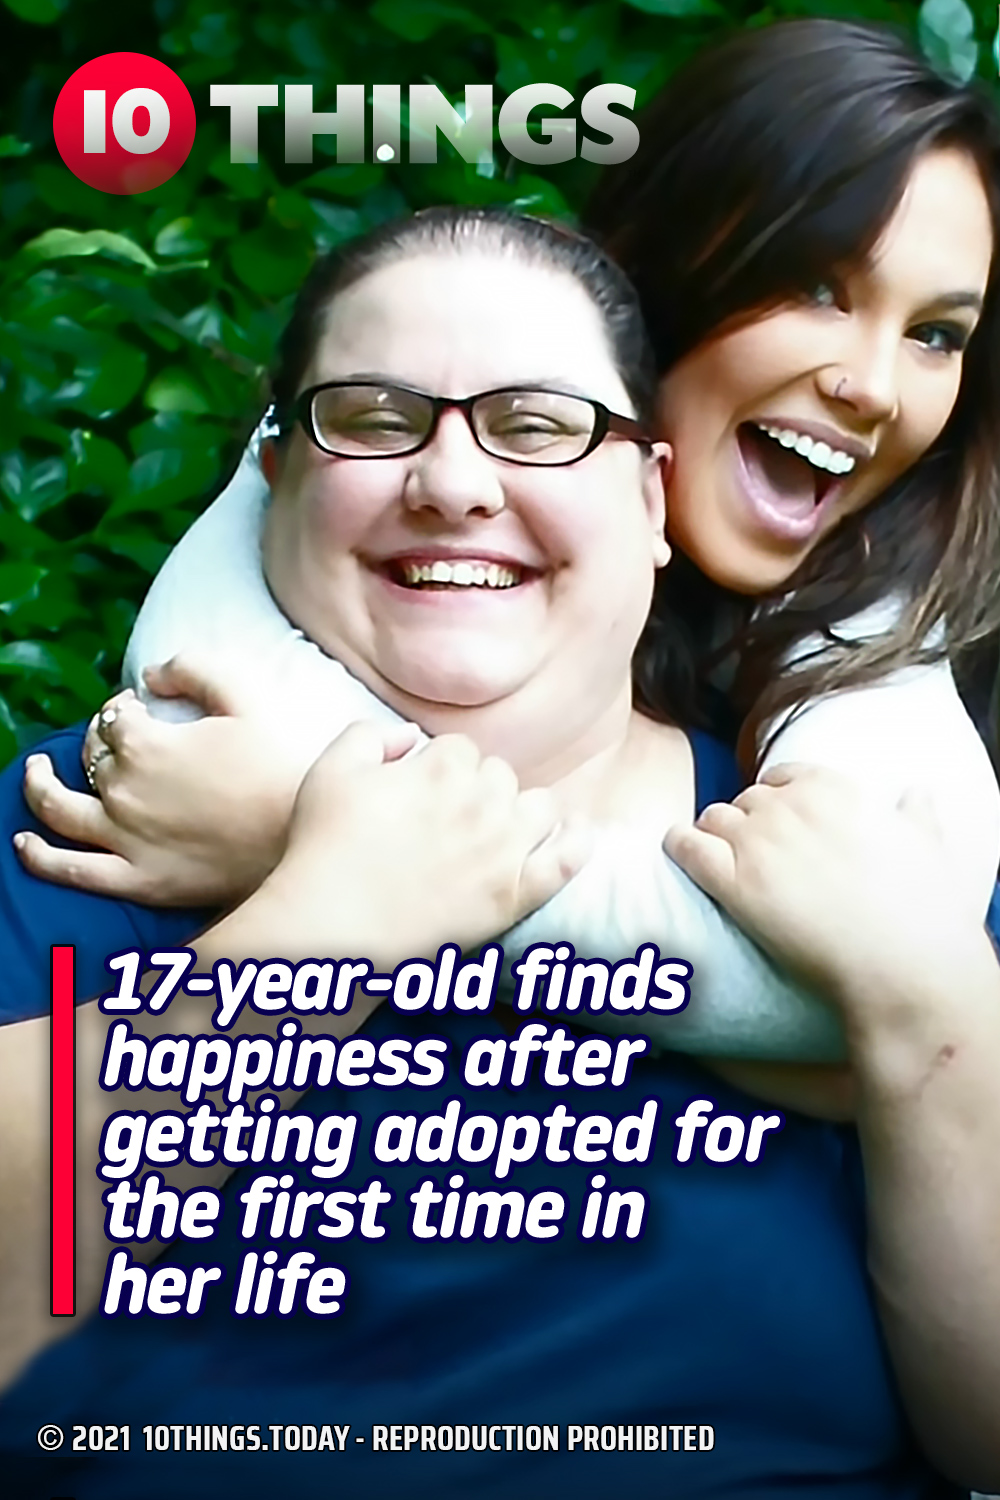 17-year-old finds happiness after getting adopted for the first time in her life